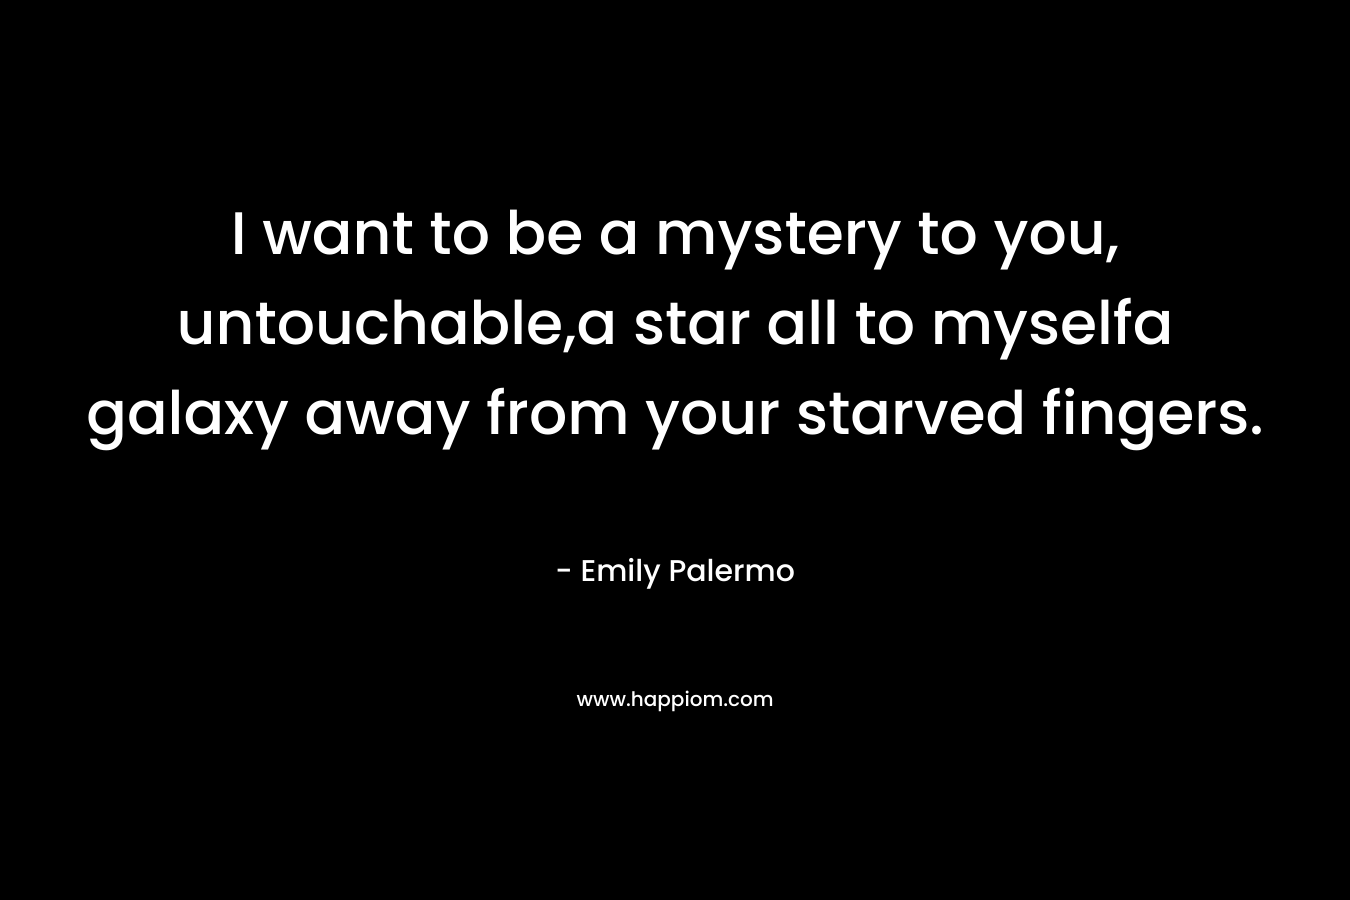 I want to be a mystery to you, untouchable,a star all to myselfa galaxy away from your starved fingers.